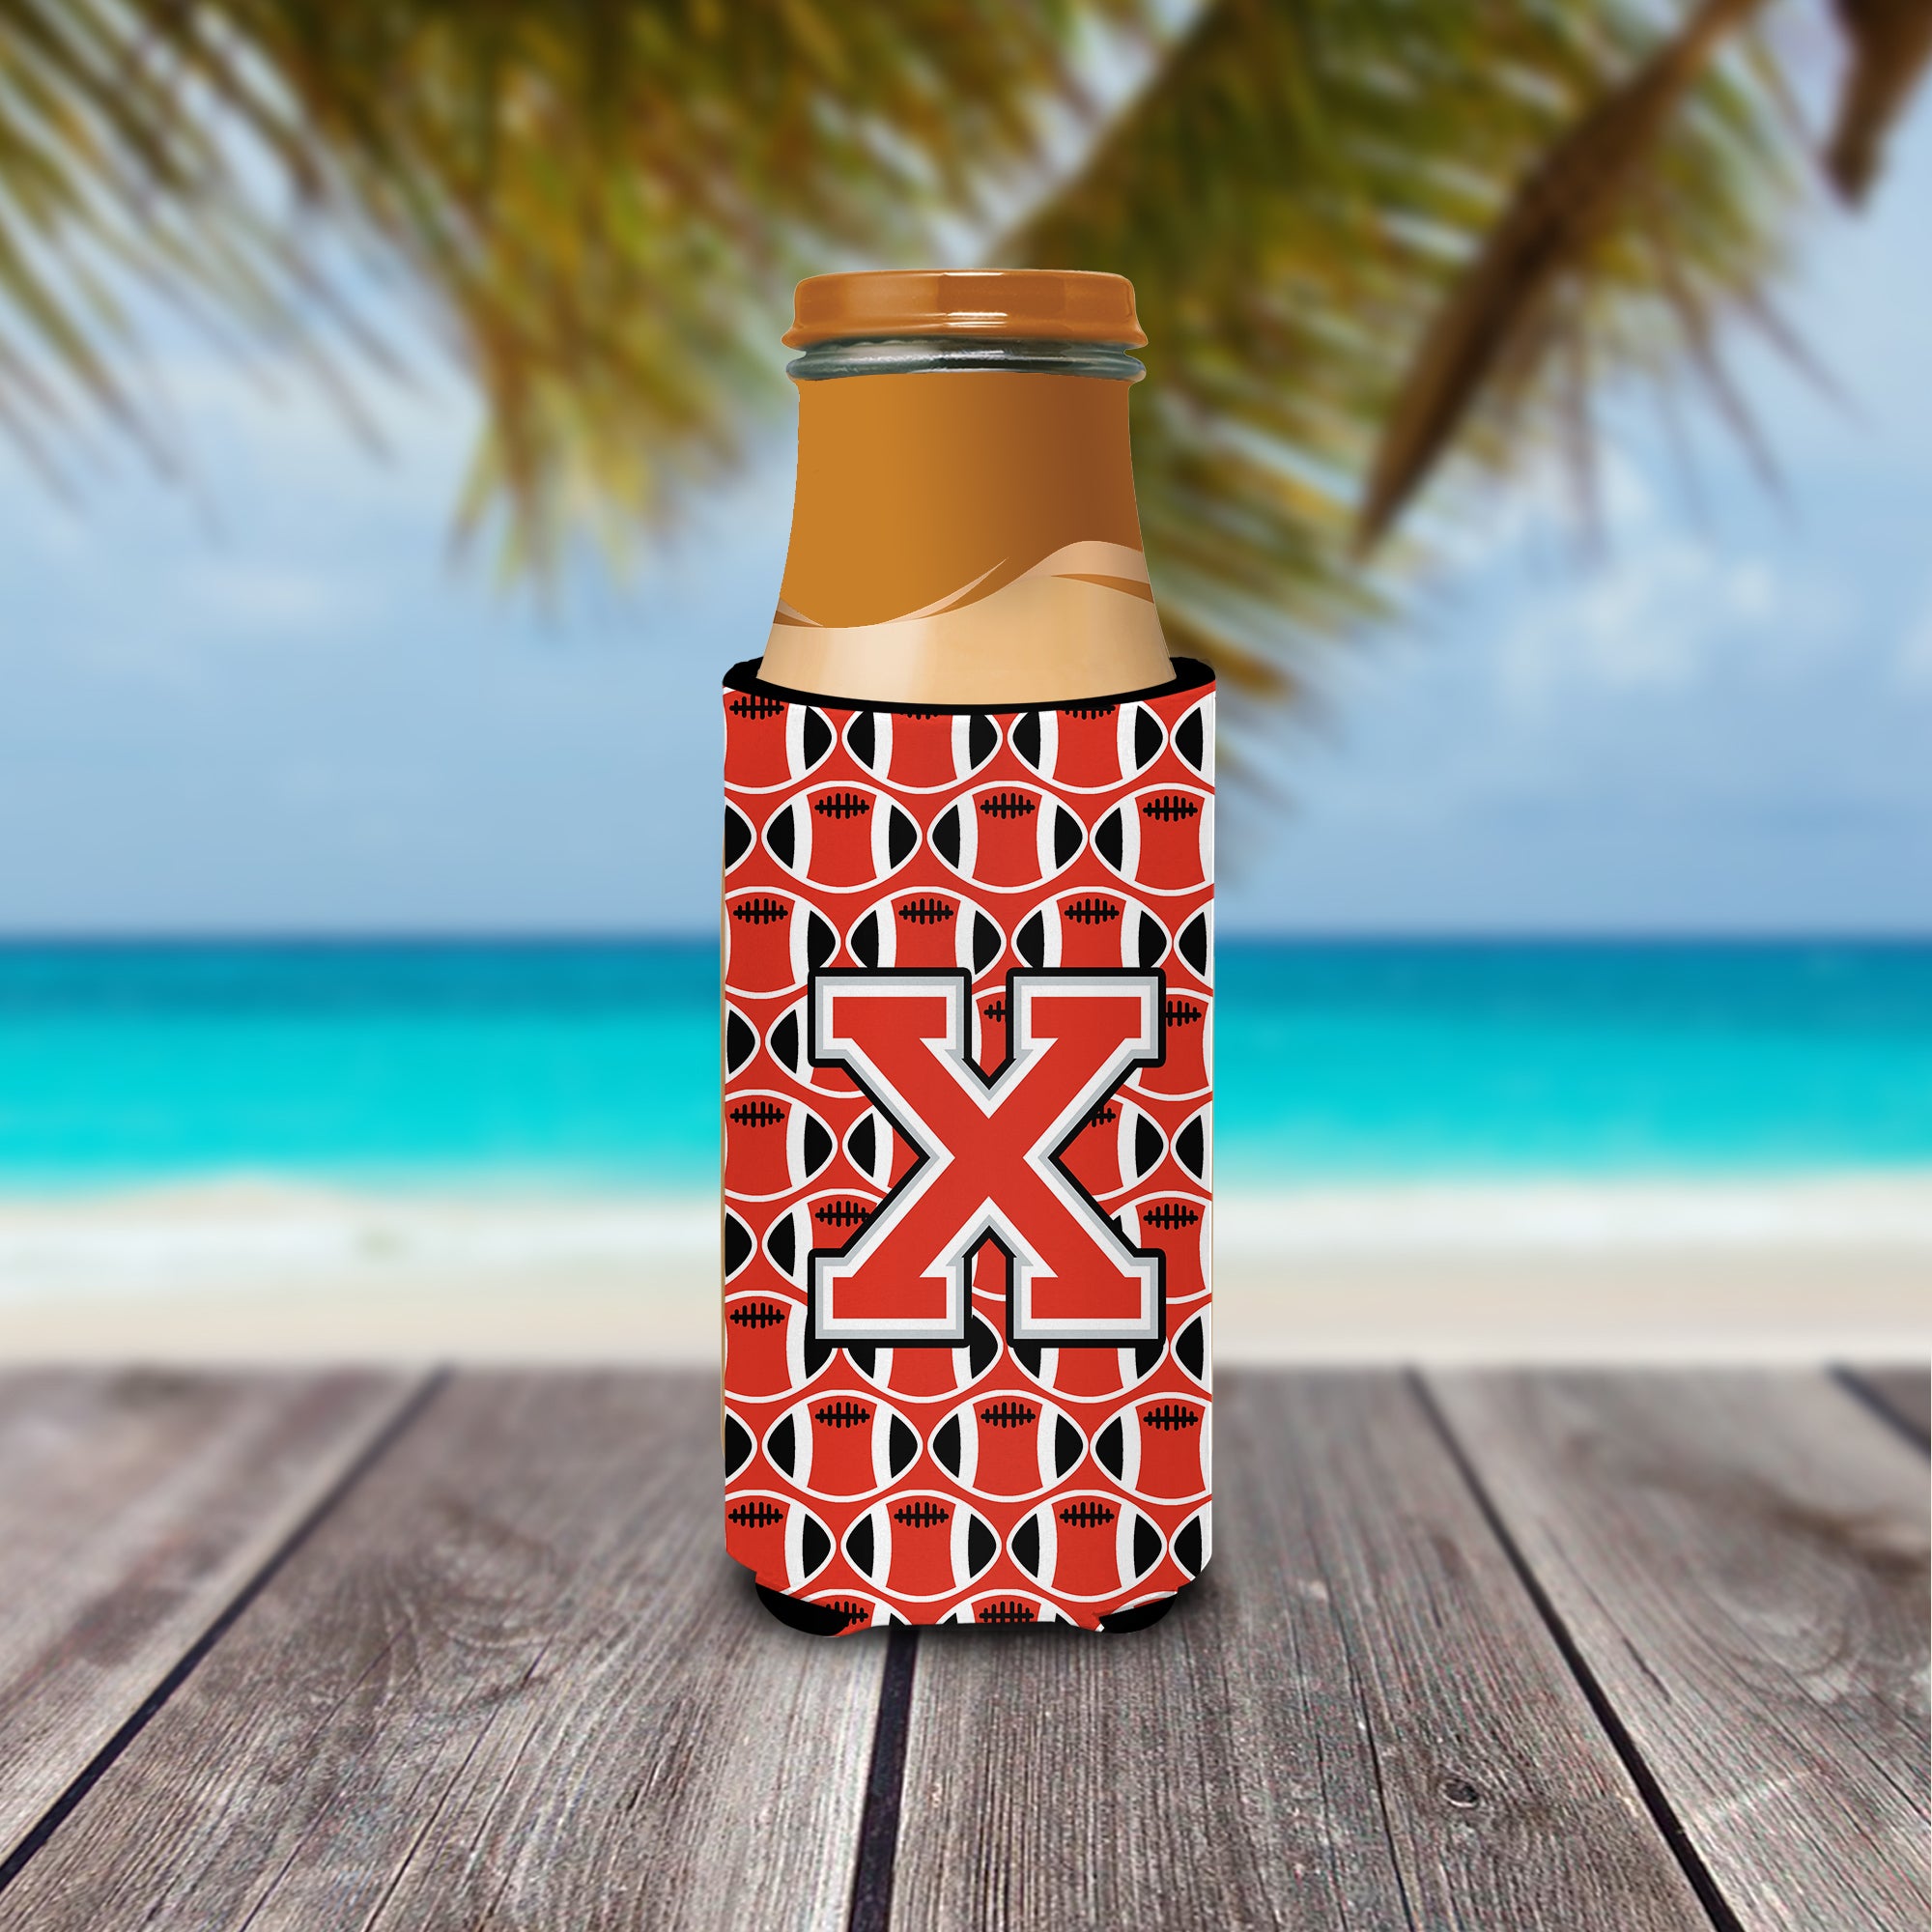 Letter X Football Scarlet and Grey Ultra Beverage Insulators for slim cans CJ1067-XMUK.